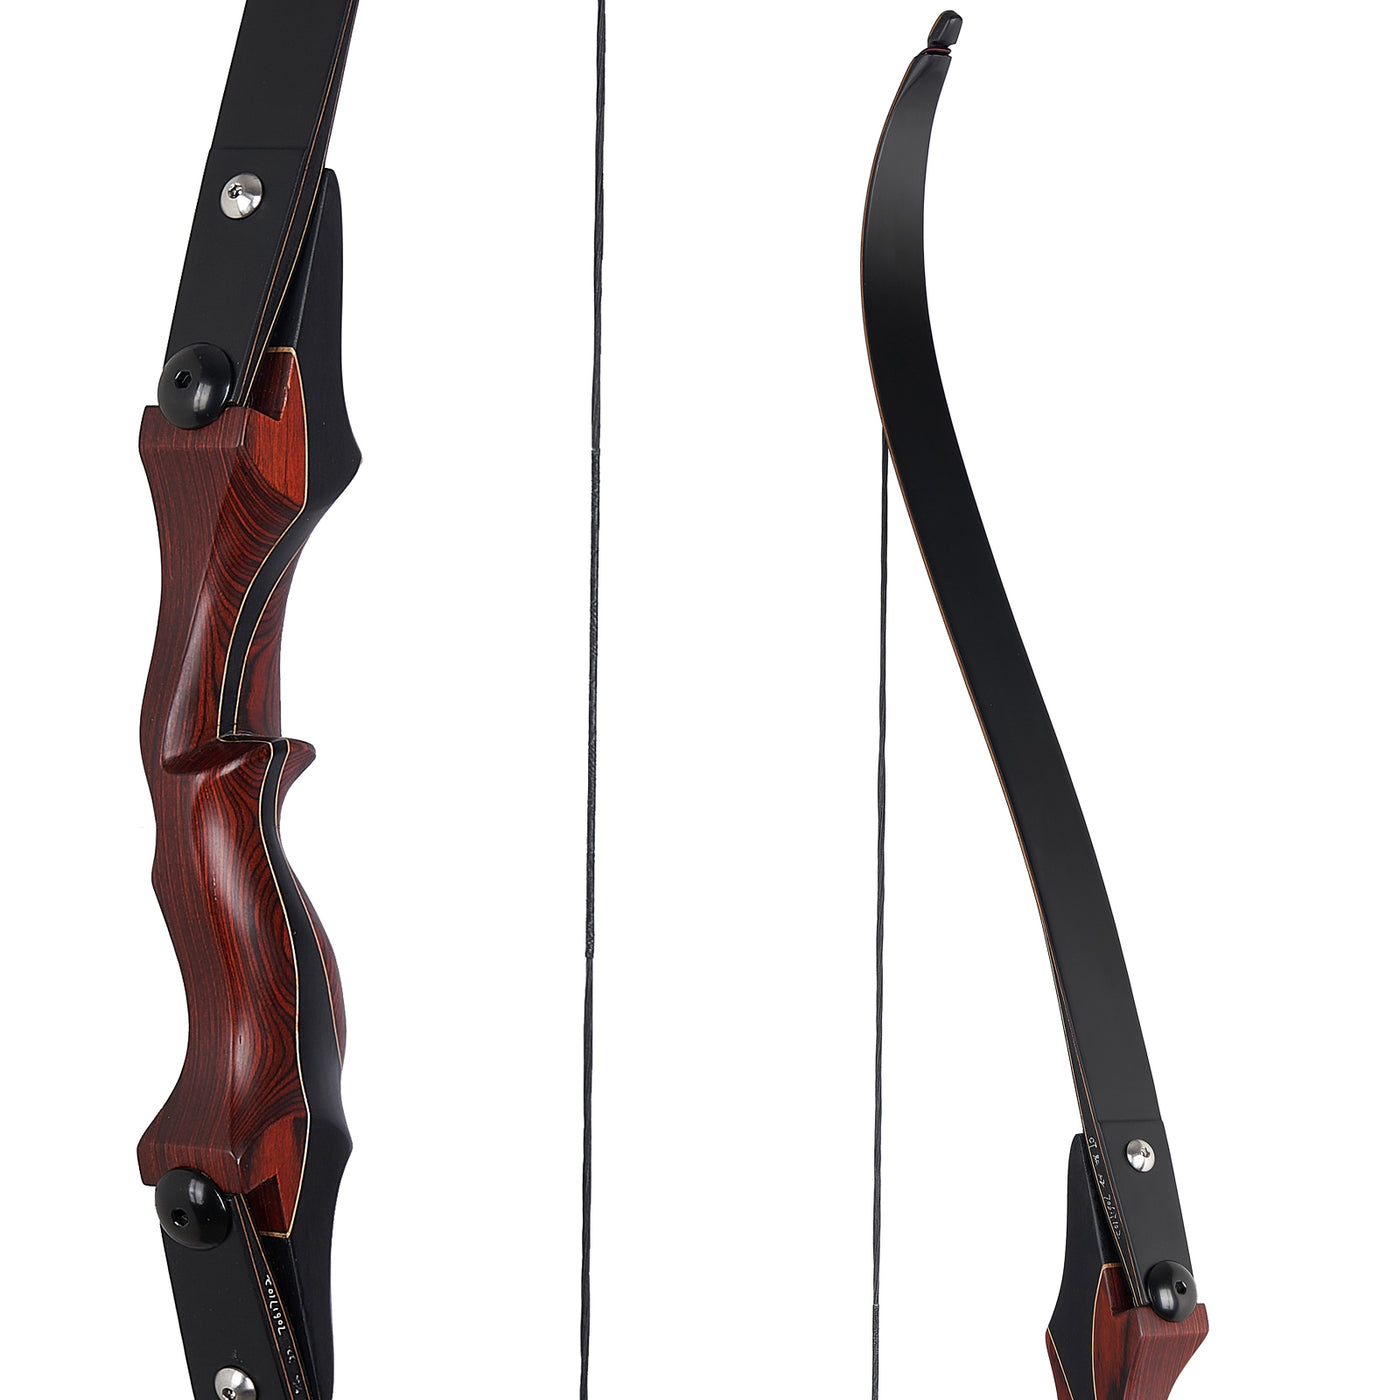 58" TopArchery Fire Phoenix ILF Wood Laminated Takedown Recurve Archery Bow Red Riser Hunting 25-50lbs